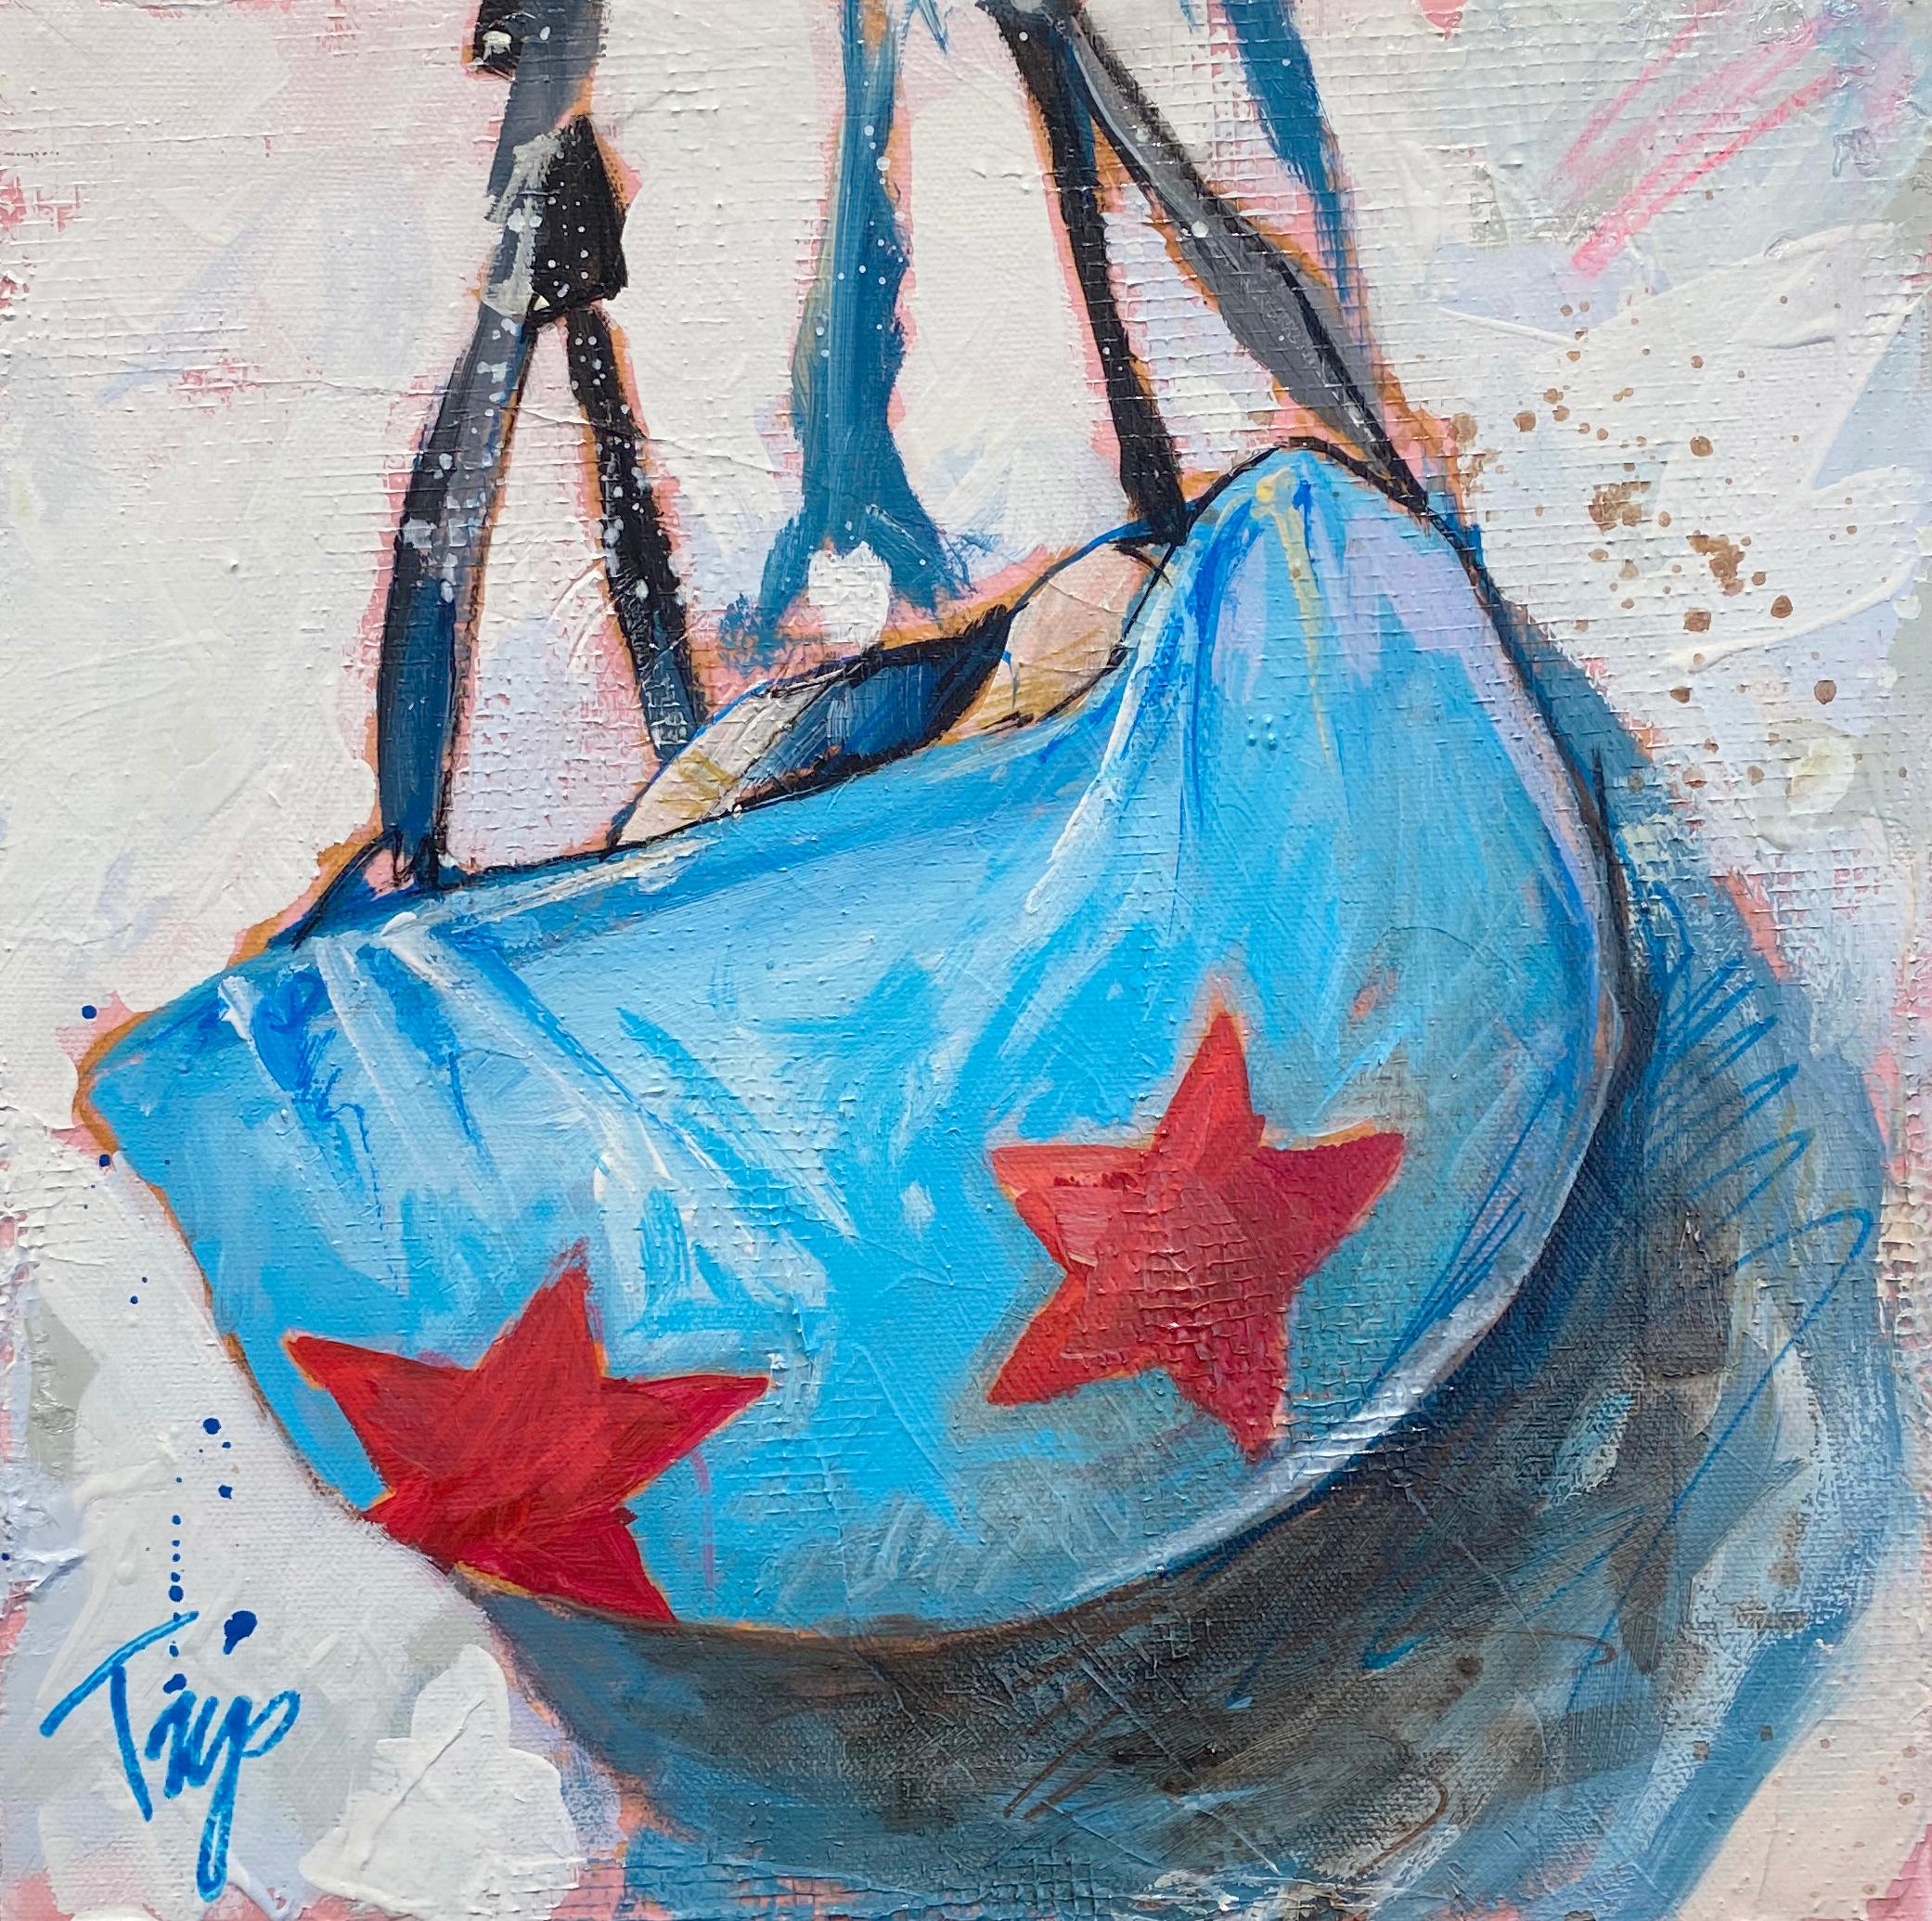 This abstract piece, "Red Star Head", is a 12x12 oil painting on canvas featuring a single blue jockey helmet with a red star pattern. Park's signature pink underpainting can be seen through the many layers of vibrant color. 

About the artist:
Trip